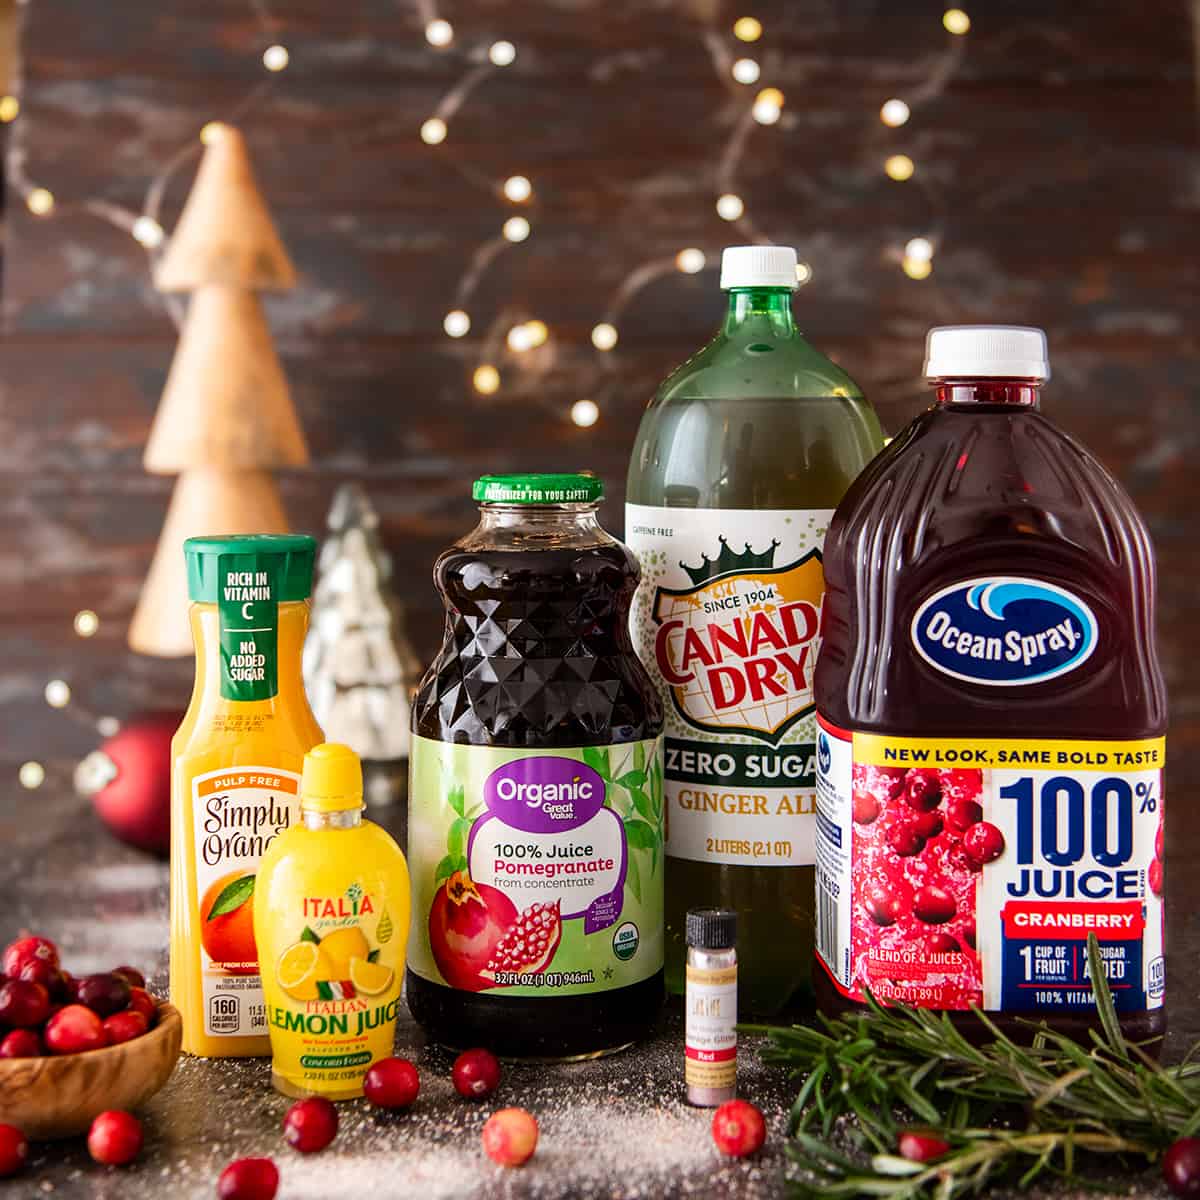 Ingredients to make a cranberry punch that is non-alcoholic and kid friendly.